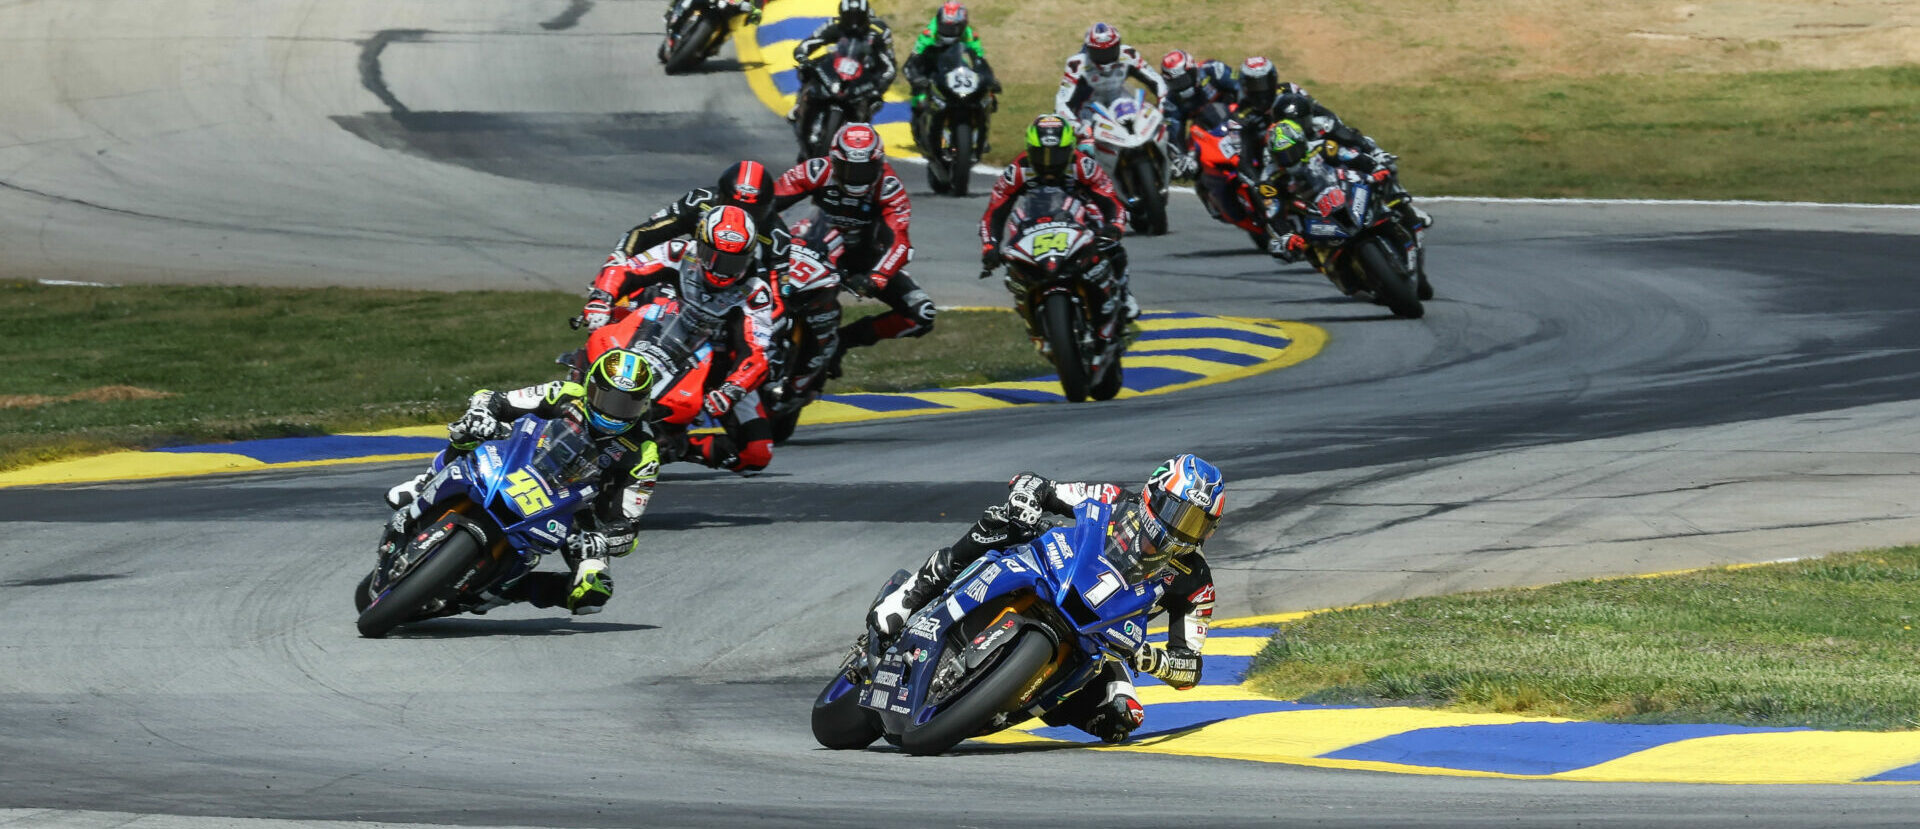 Jake Gagne (1) leads his teammate Cameron Petersen (45), Danilo Petrucci (behind Petersen) and the rest of the MotoAmerica Medallia Superbike class at Road Atlanta on Sunday. Photo by Brian J. Nelson.